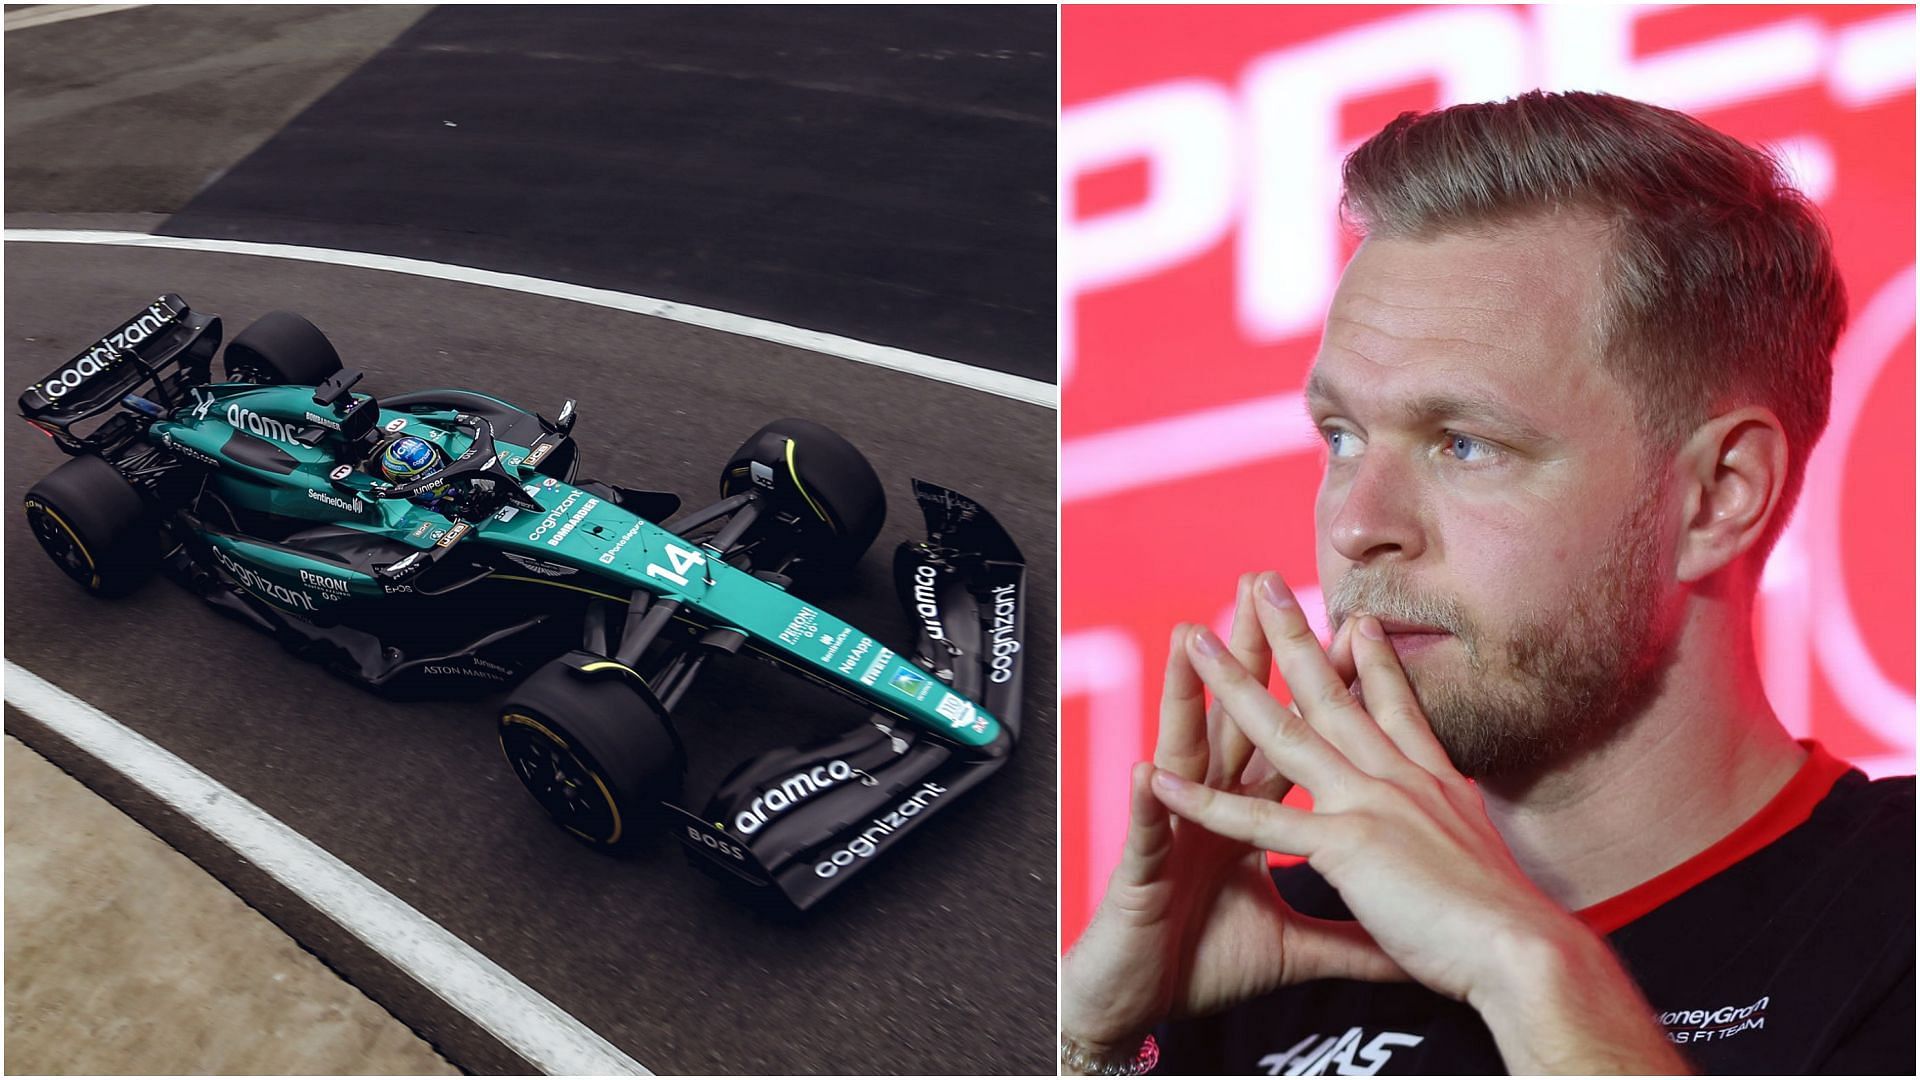 AMR23 (Left) and Kevin Magnussen (Right) (Collage via Sportskeeda)